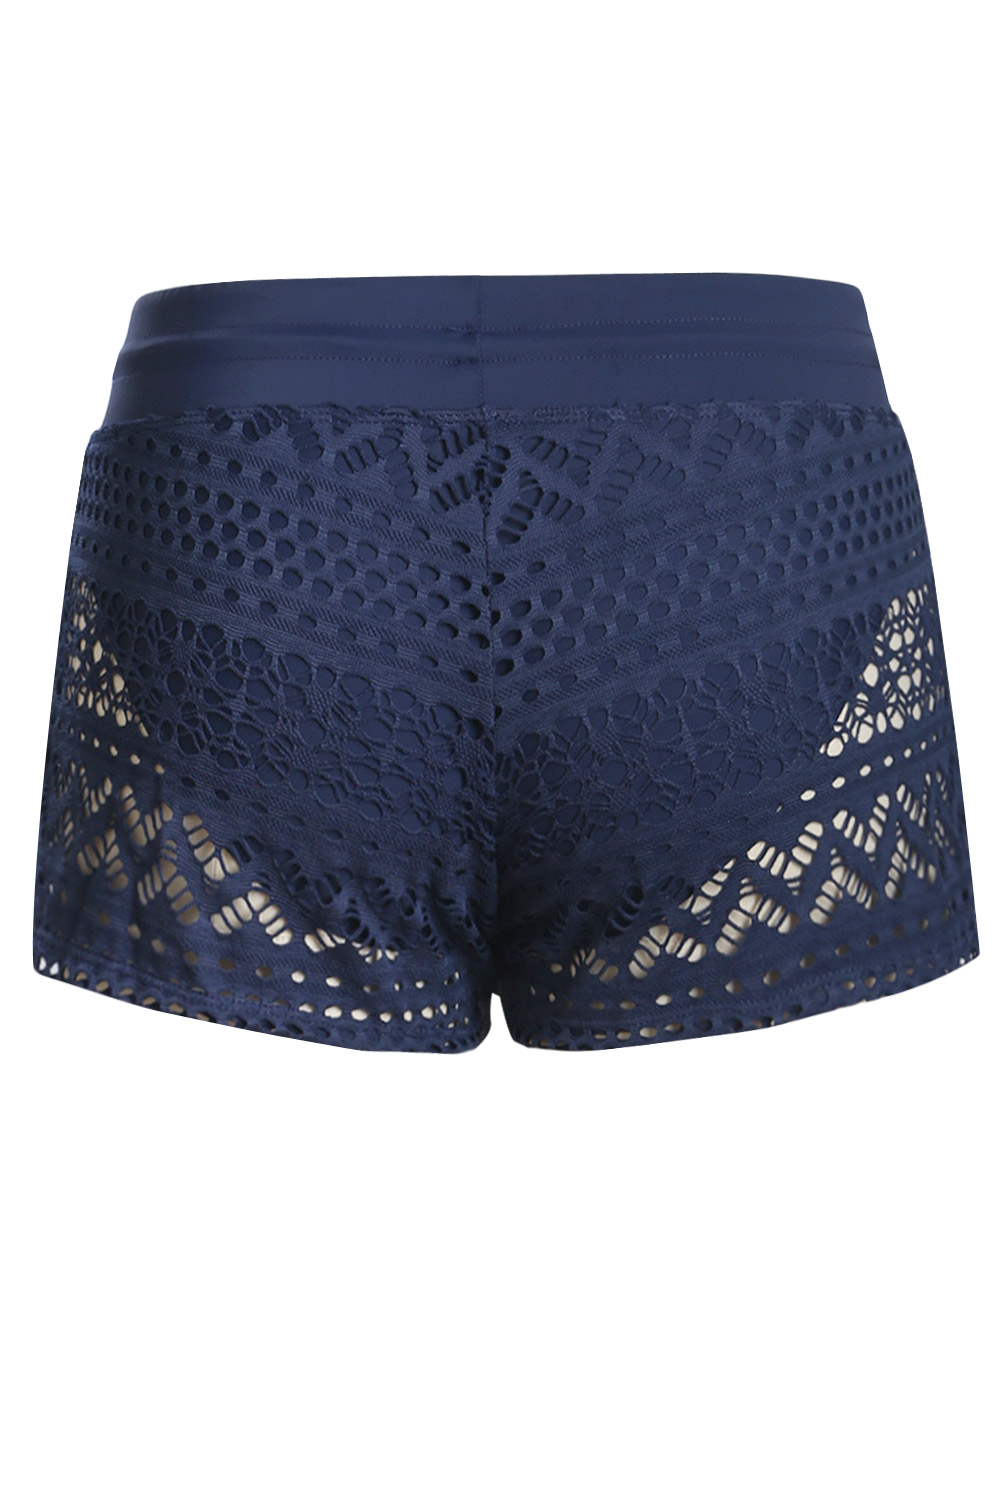 Brinn Women's Lace Shorts Hollow Out Overlay Swim Bottom Blue - Amber ...